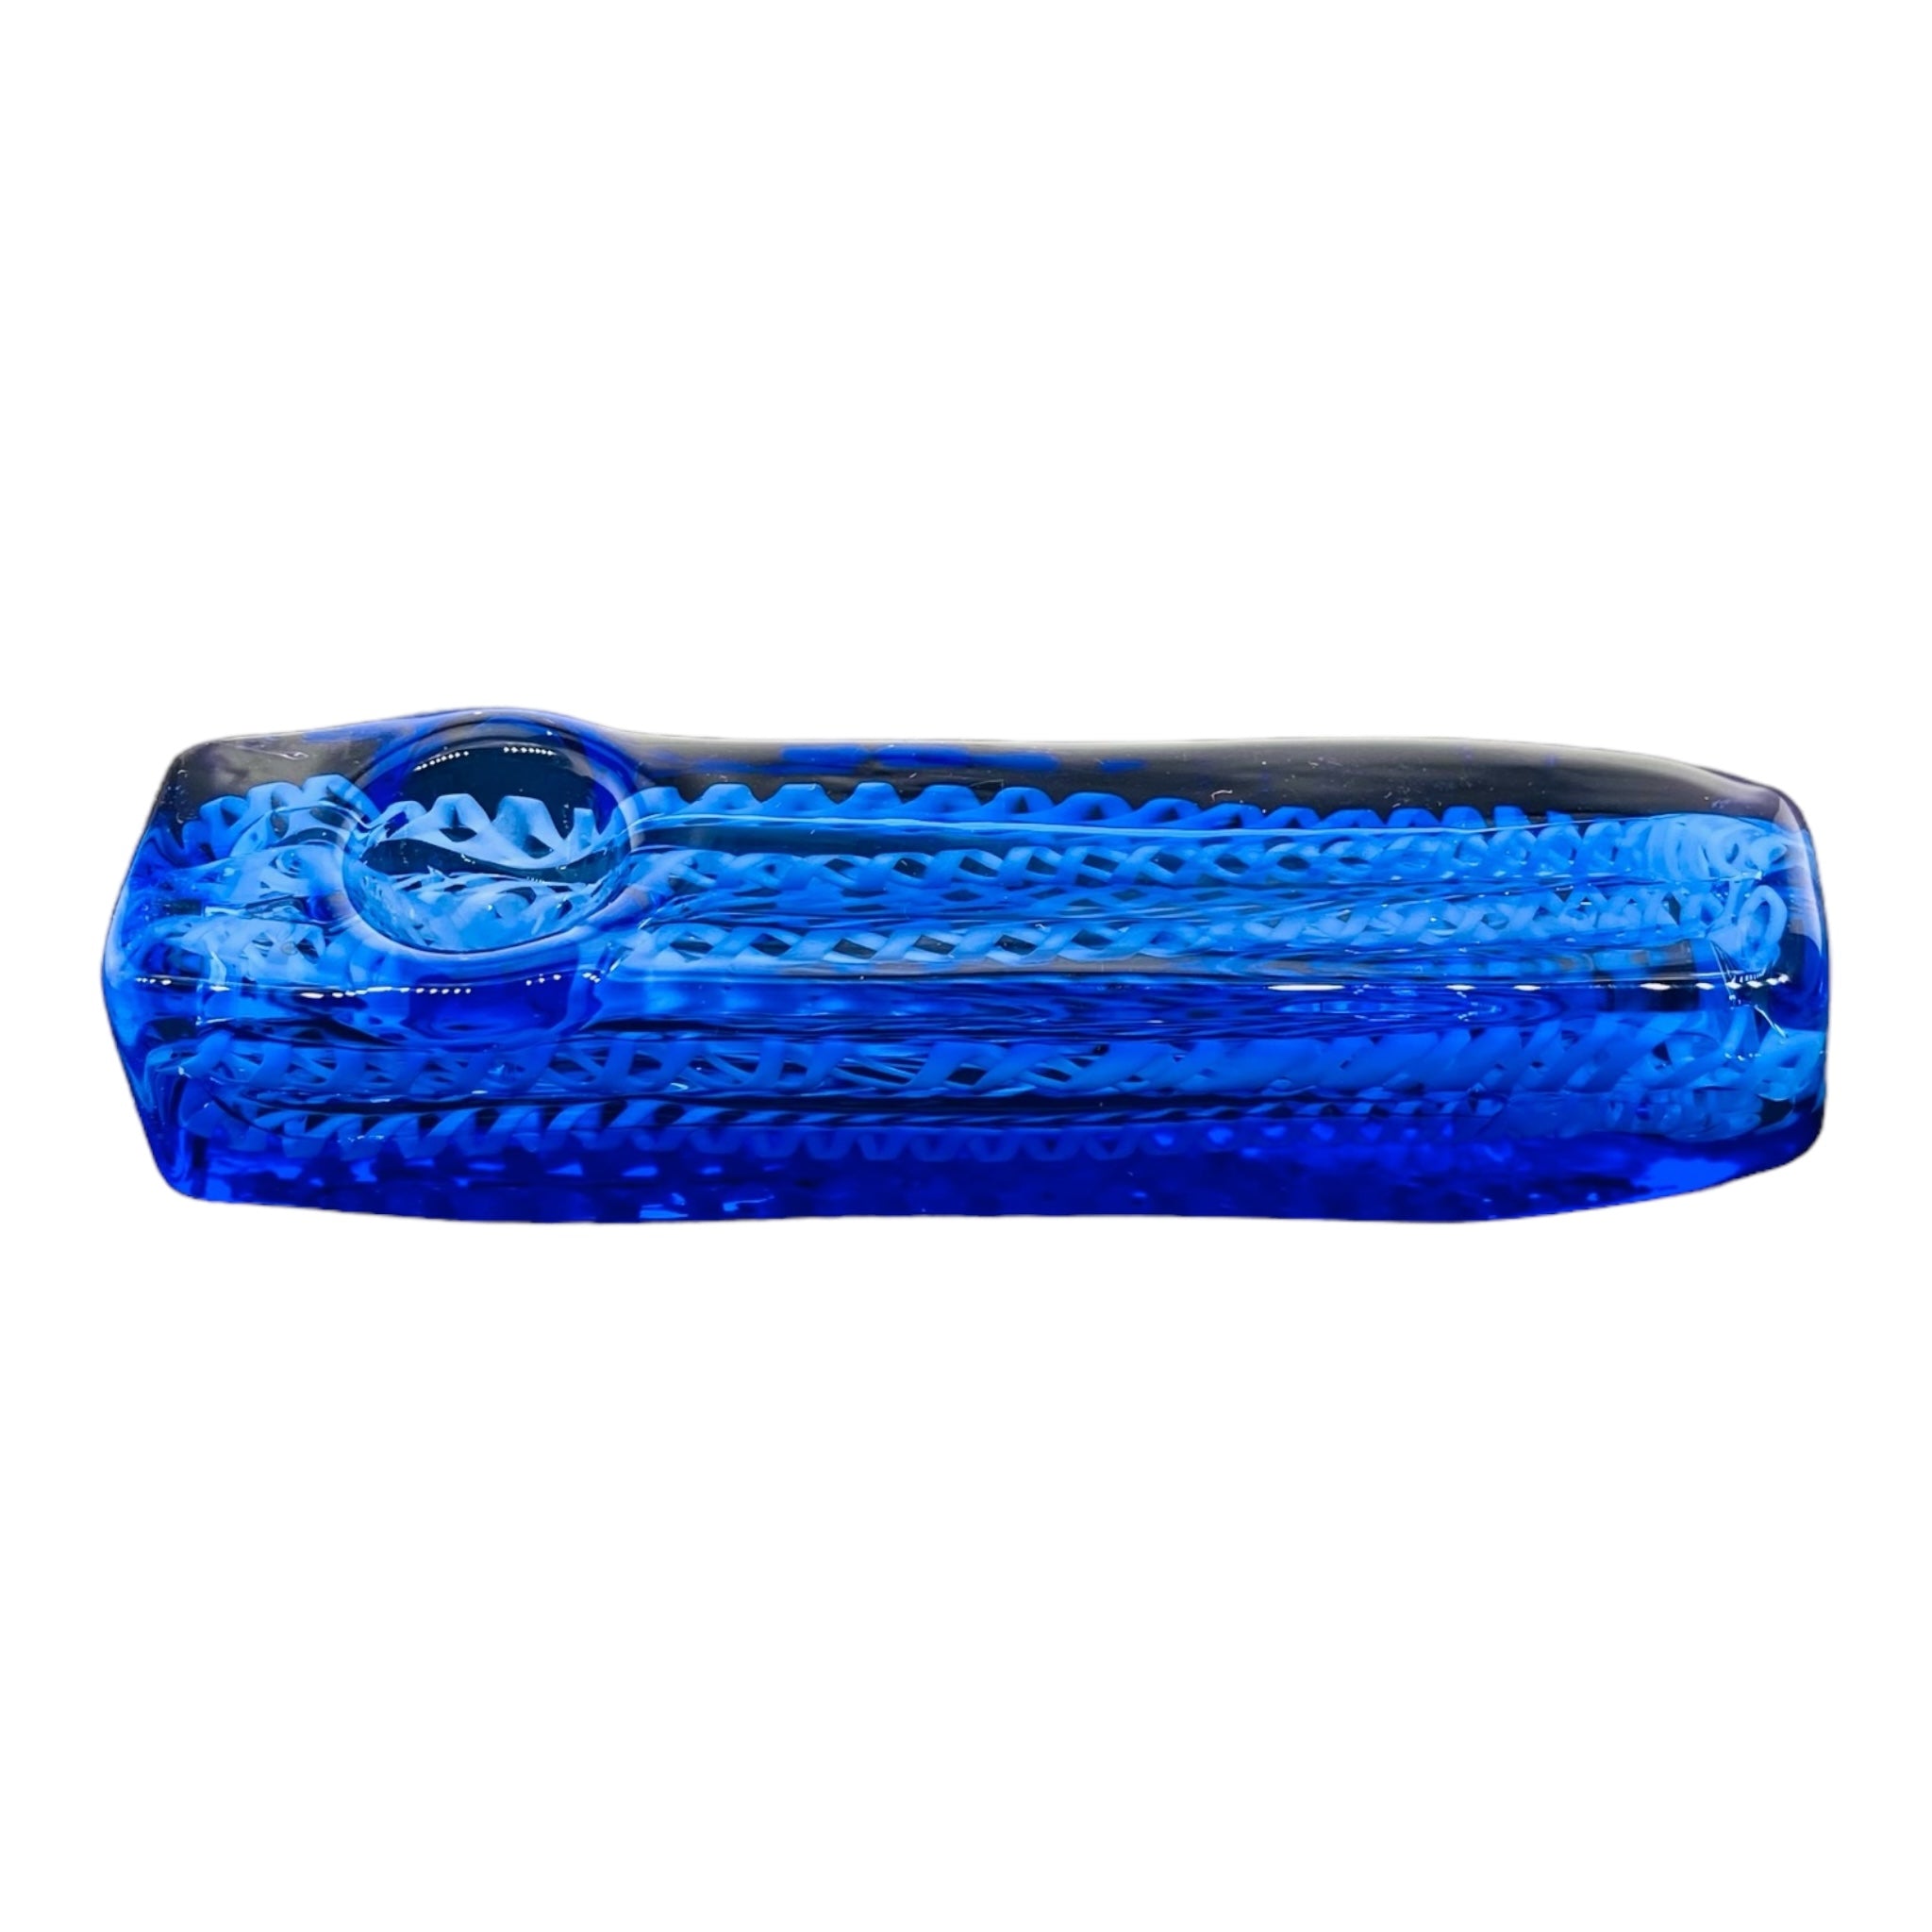 Glass Hand Pipes - Blue And White Linework Twist Rectangle Glass Hand Pipe